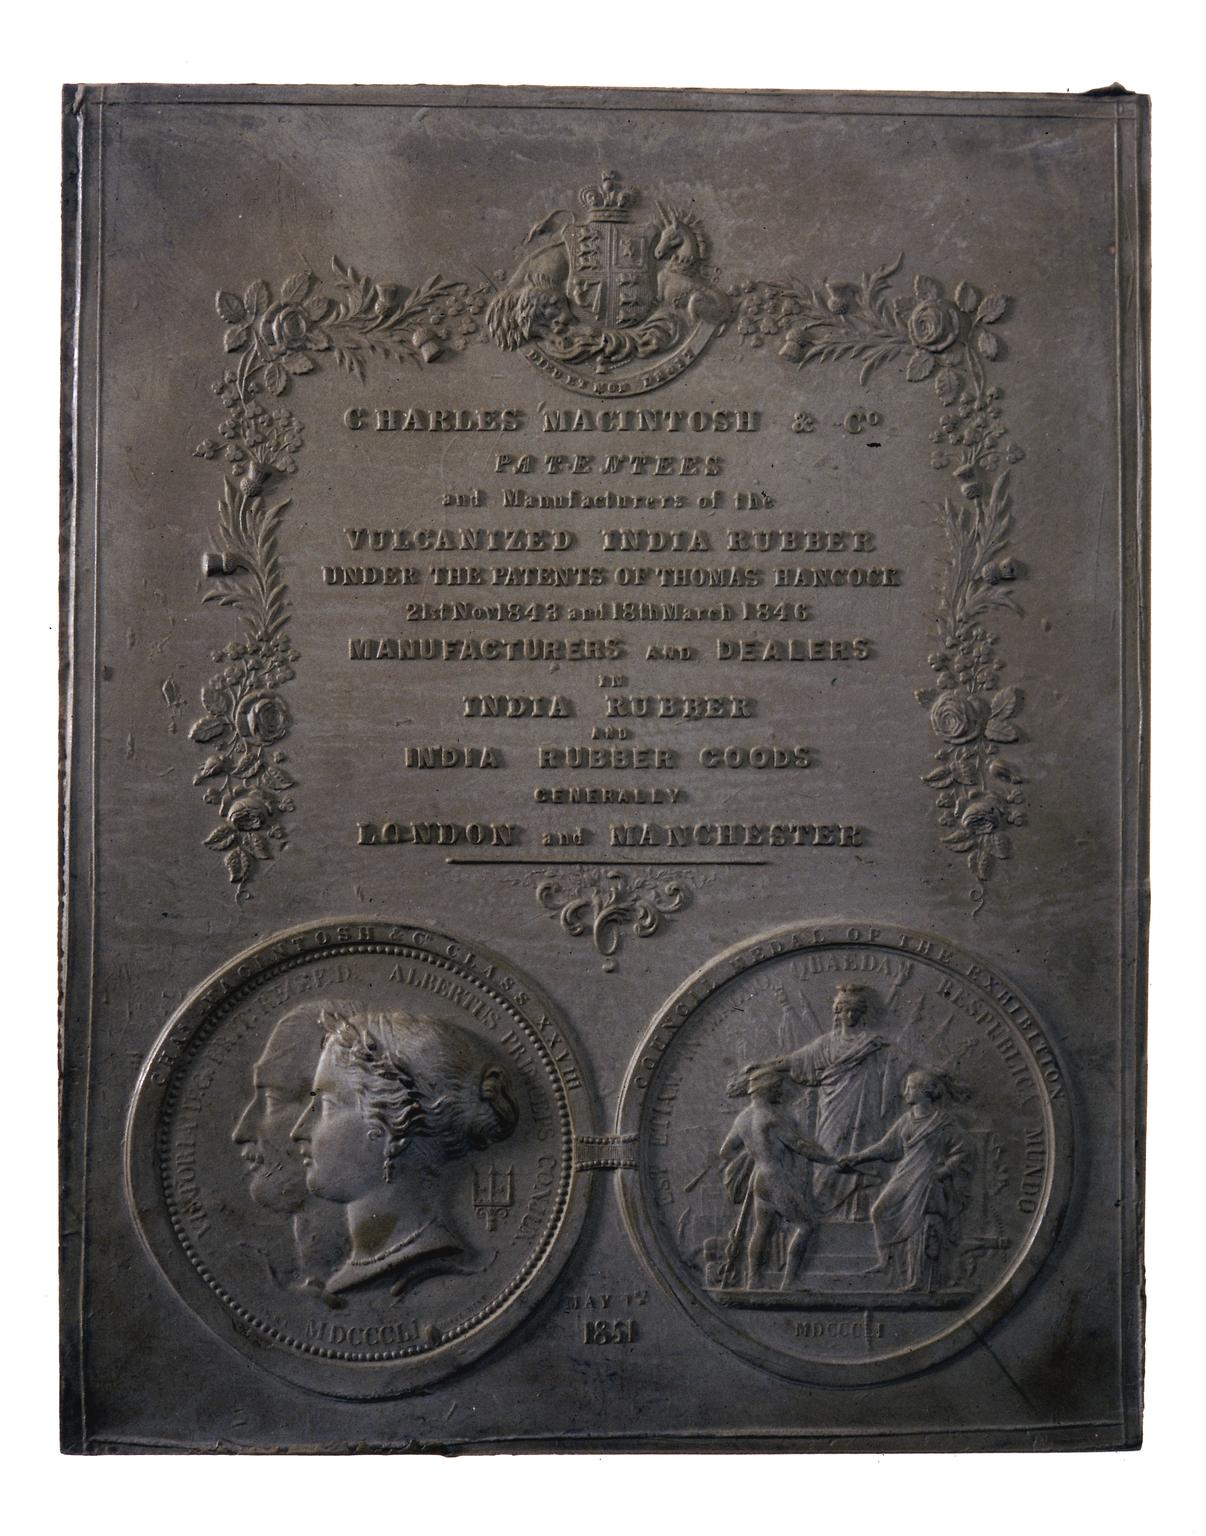 A grey plaque with some text and portraits of people on it